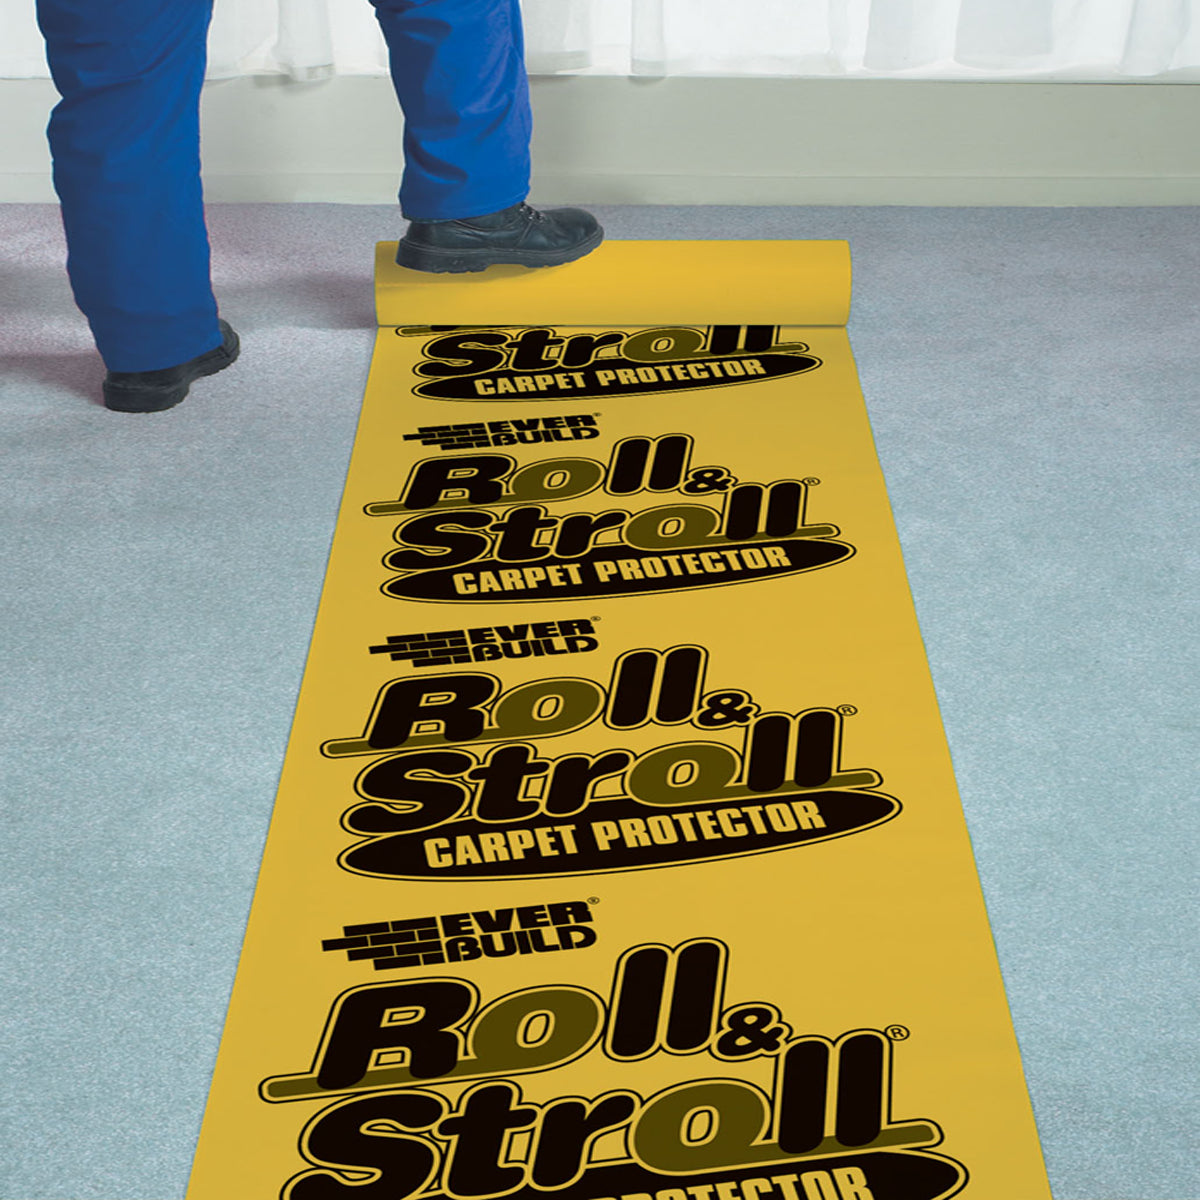 Everbuild Roll & Stroll 600mm x 75m Carpet Floor Protection Film Dust Protector